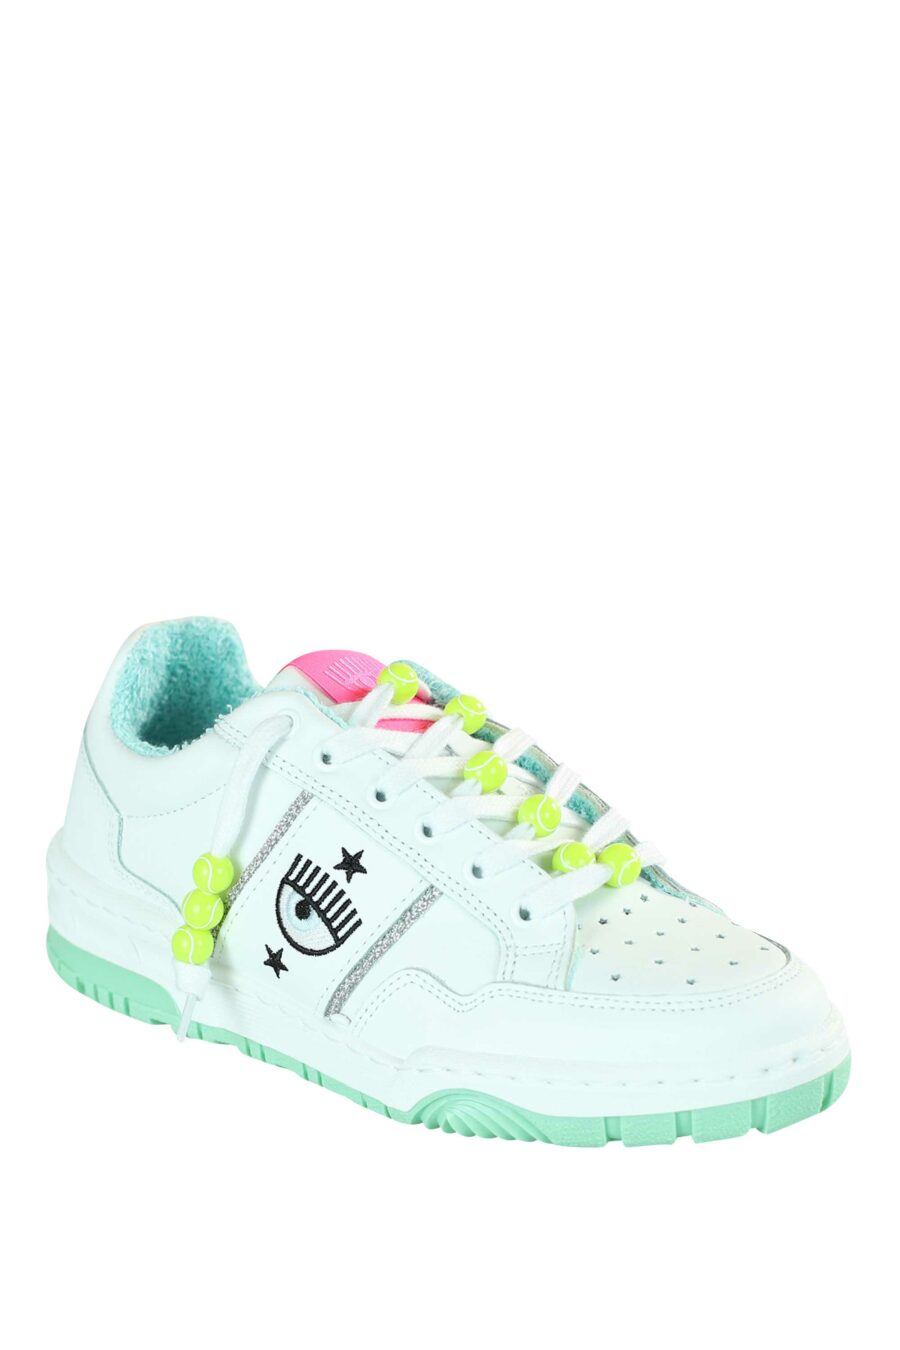 White trainers with eye logo and multicoloured details - 8059388228850 2